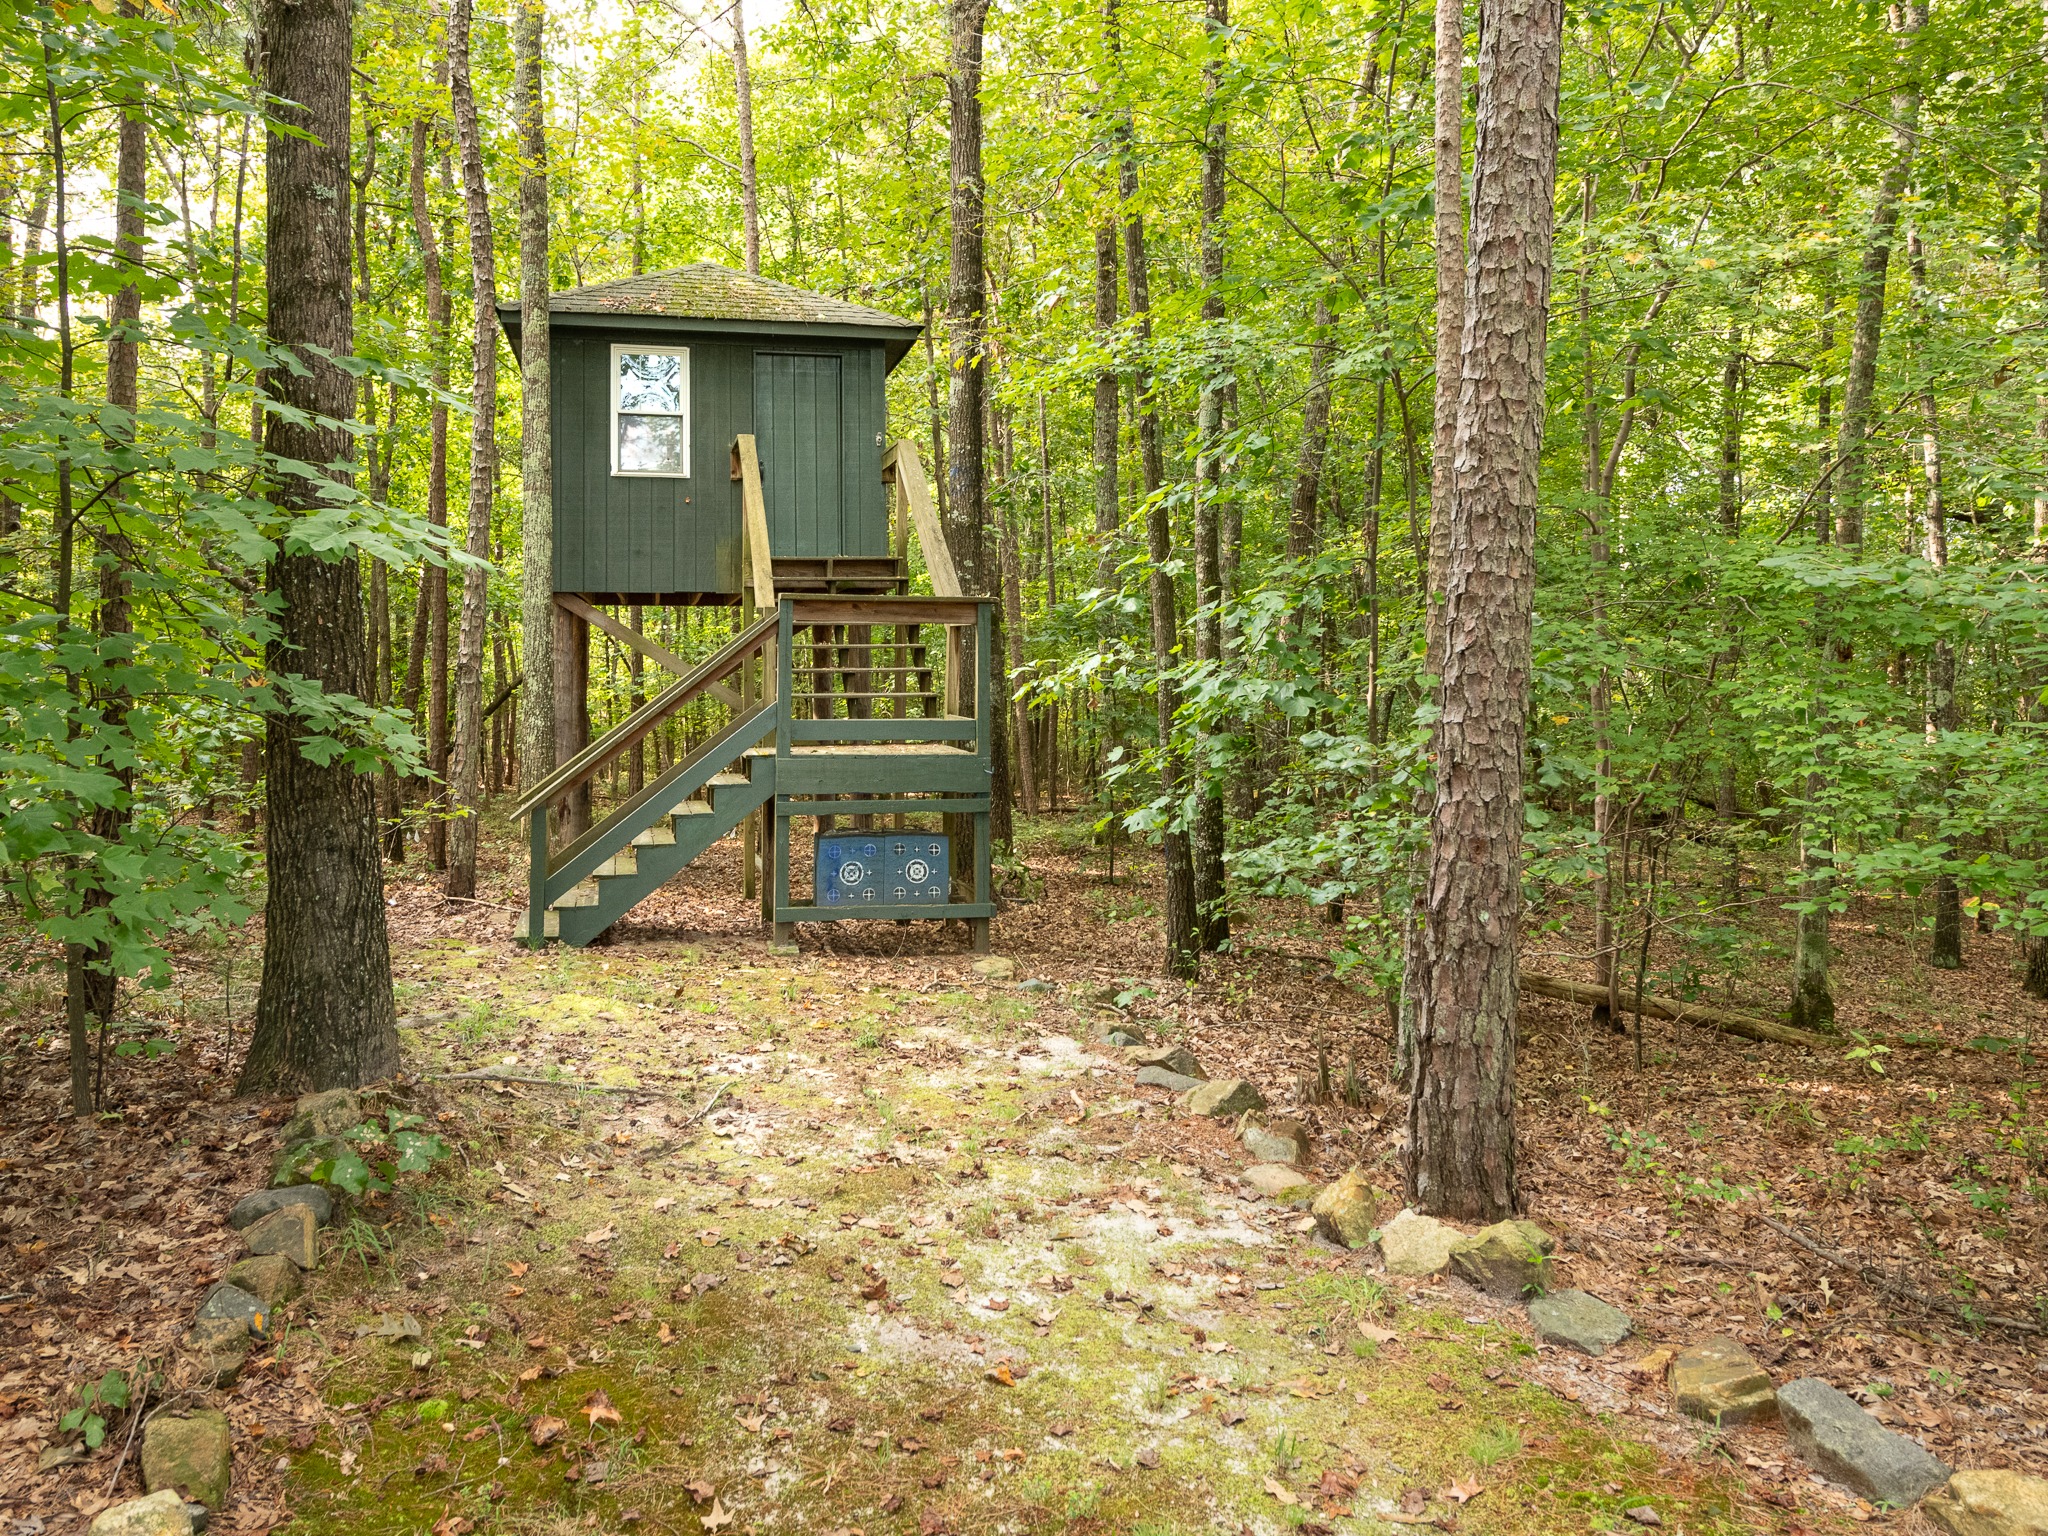 Play fort in wooded section of back yard